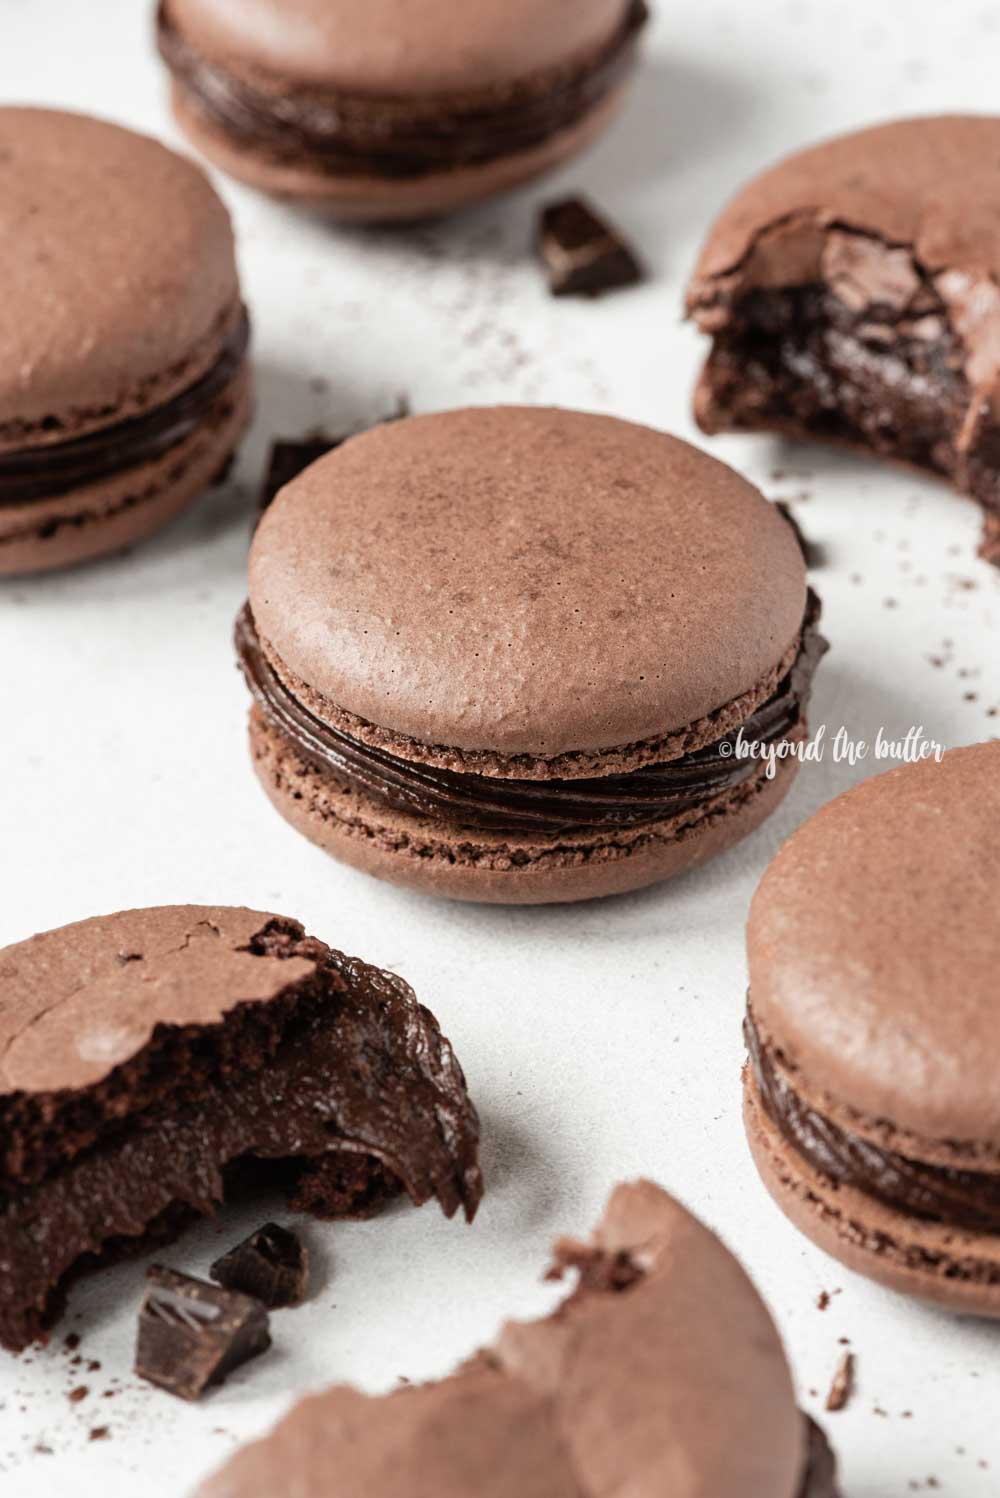 Scattered dark chocolate macarons with some broken or pulled apart | All Images © Beyond the Butter™